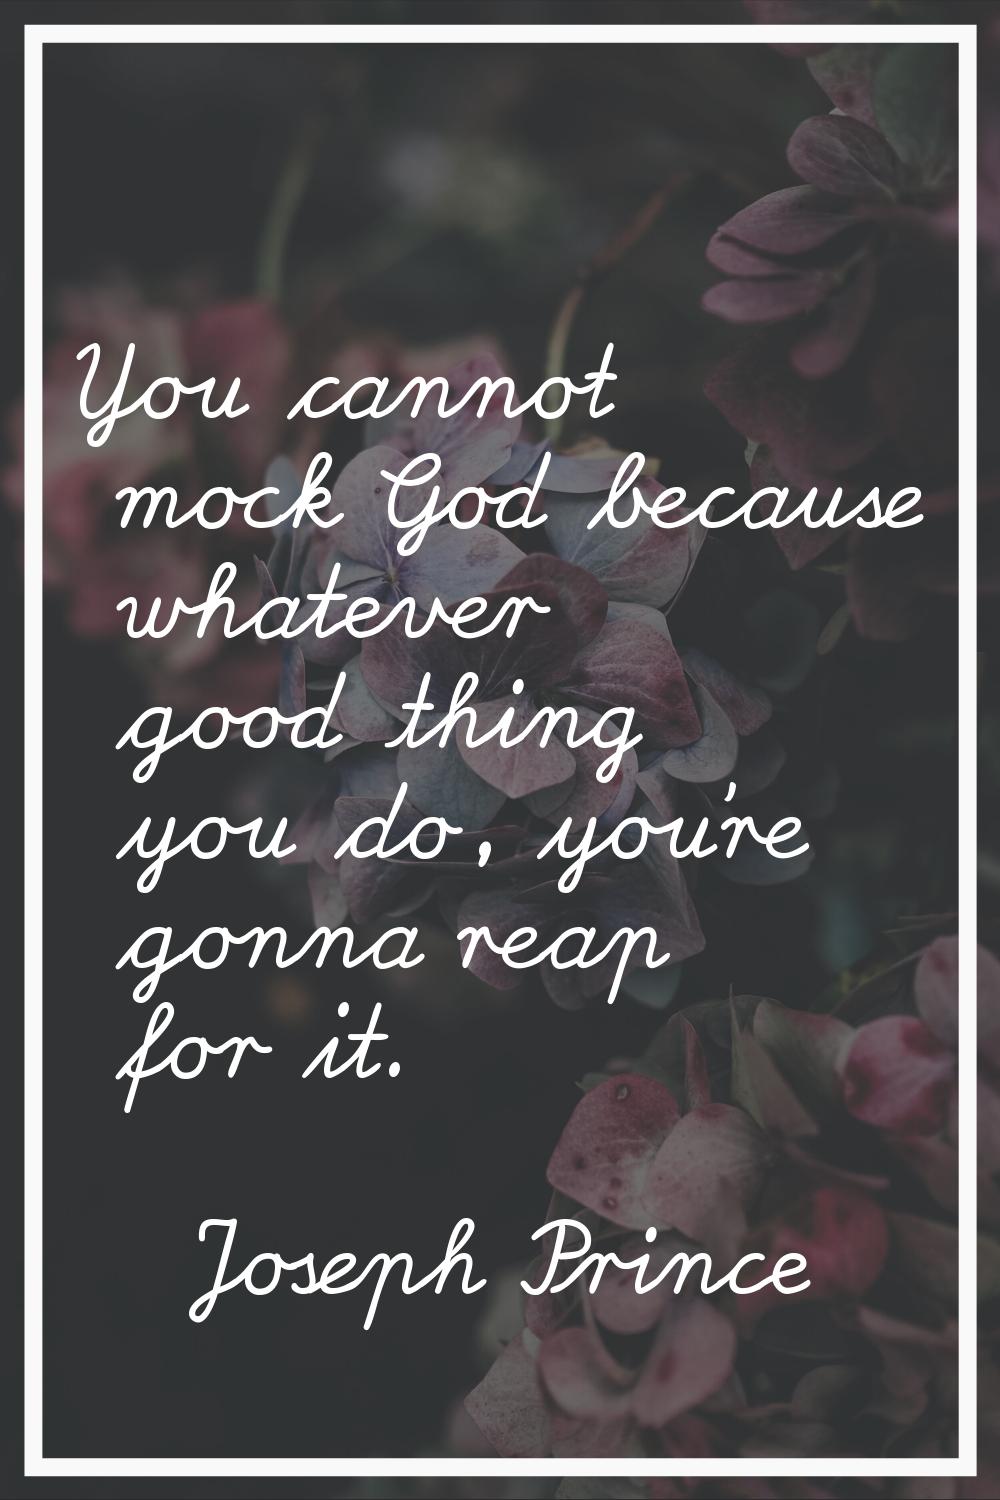 You cannot mock God because whatever good thing you do, you're gonna reap for it.